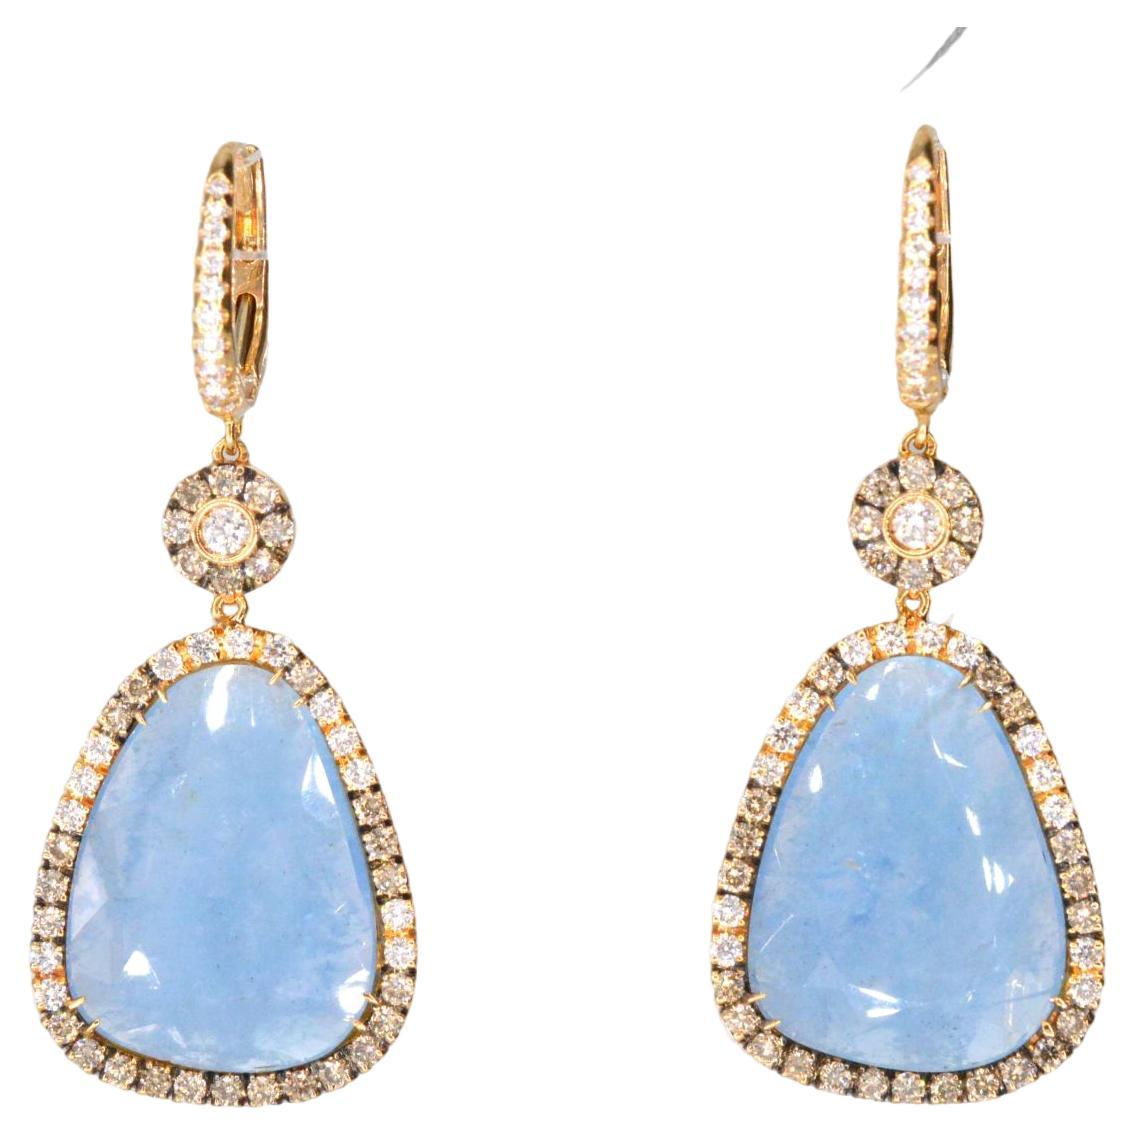 Crivelli - Golden earrings with large natural gemstones and a surround of diamon For Sale